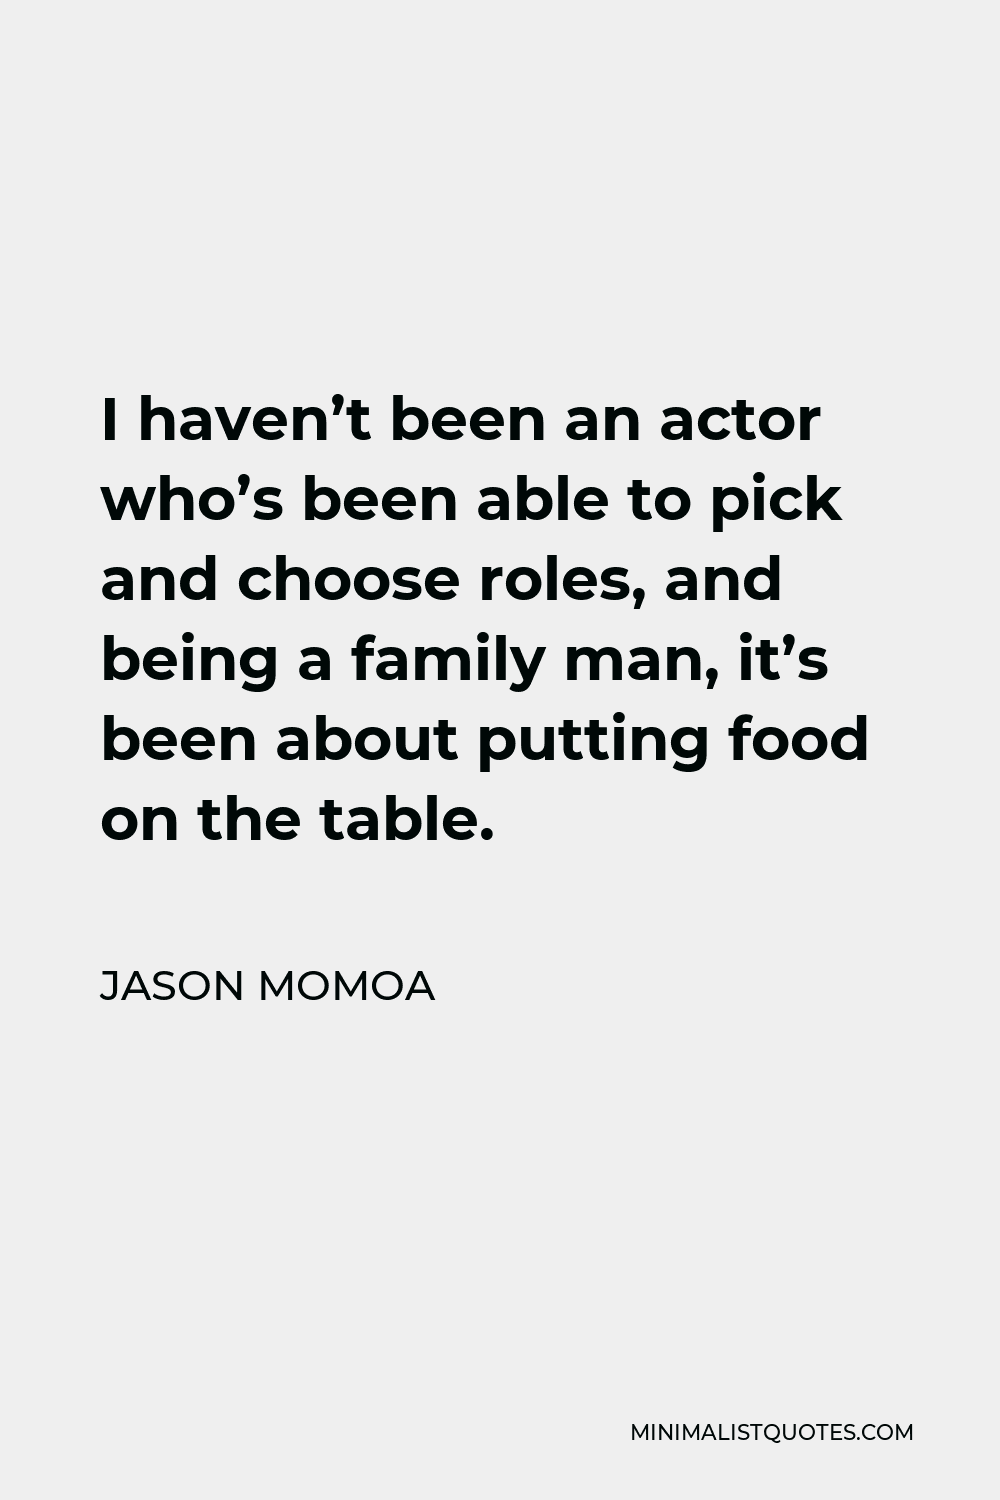 Jason Momoa Quote - I haven’t been an actor who’s been able to pick and choose roles, and being a family man, it’s been about putting food on the table.